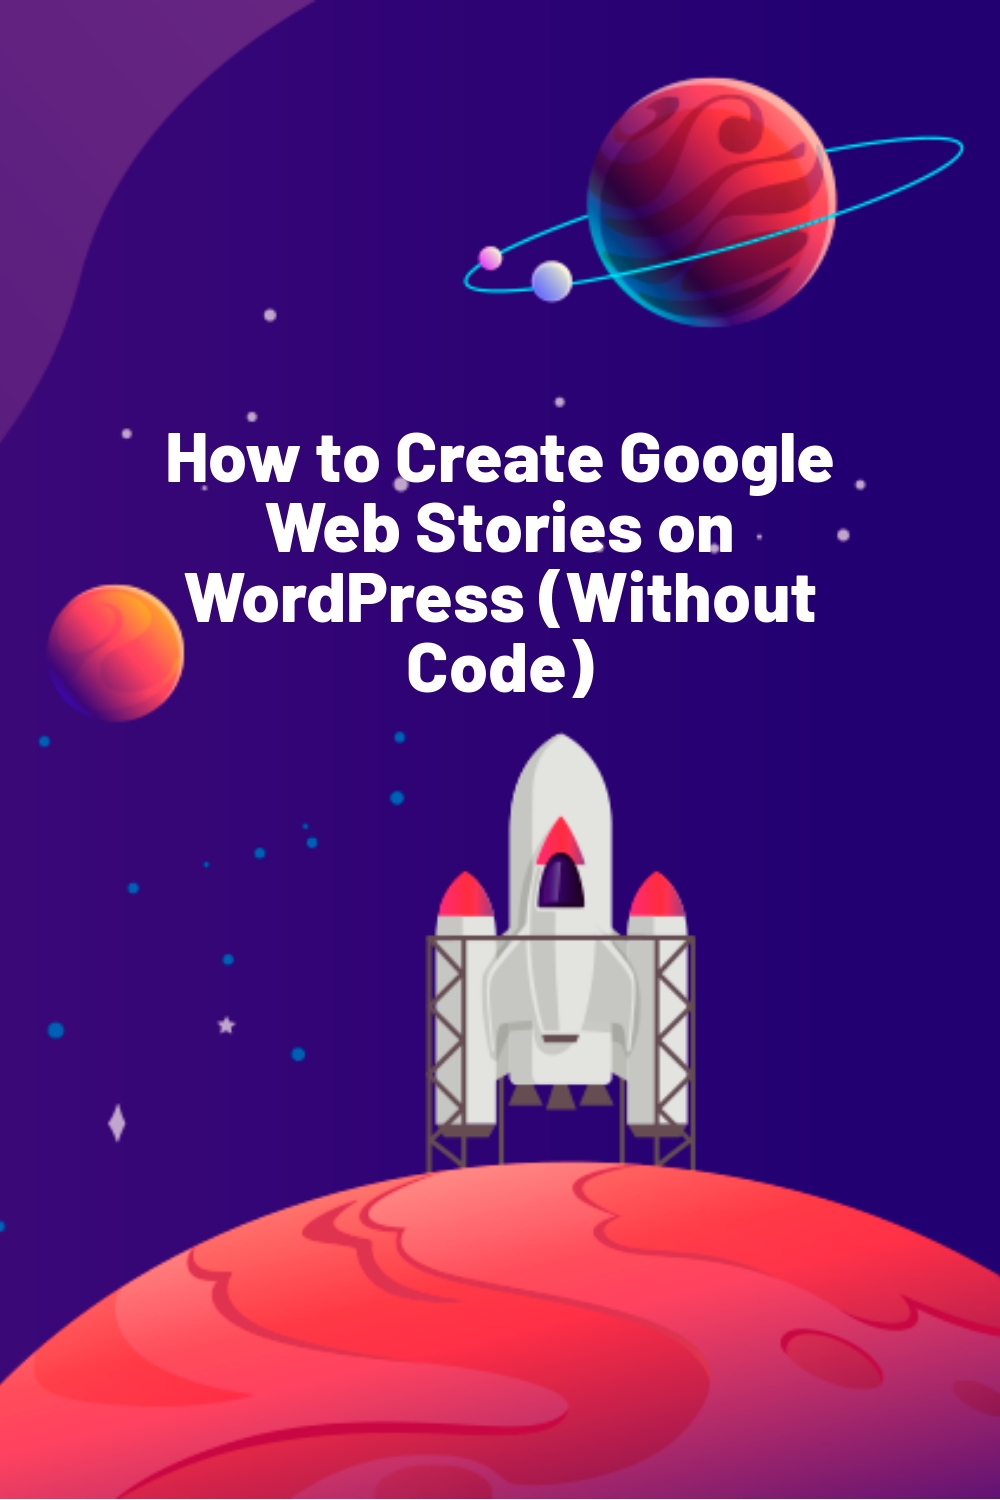 How to Create Google Web Stories on WordPress (Without Code)